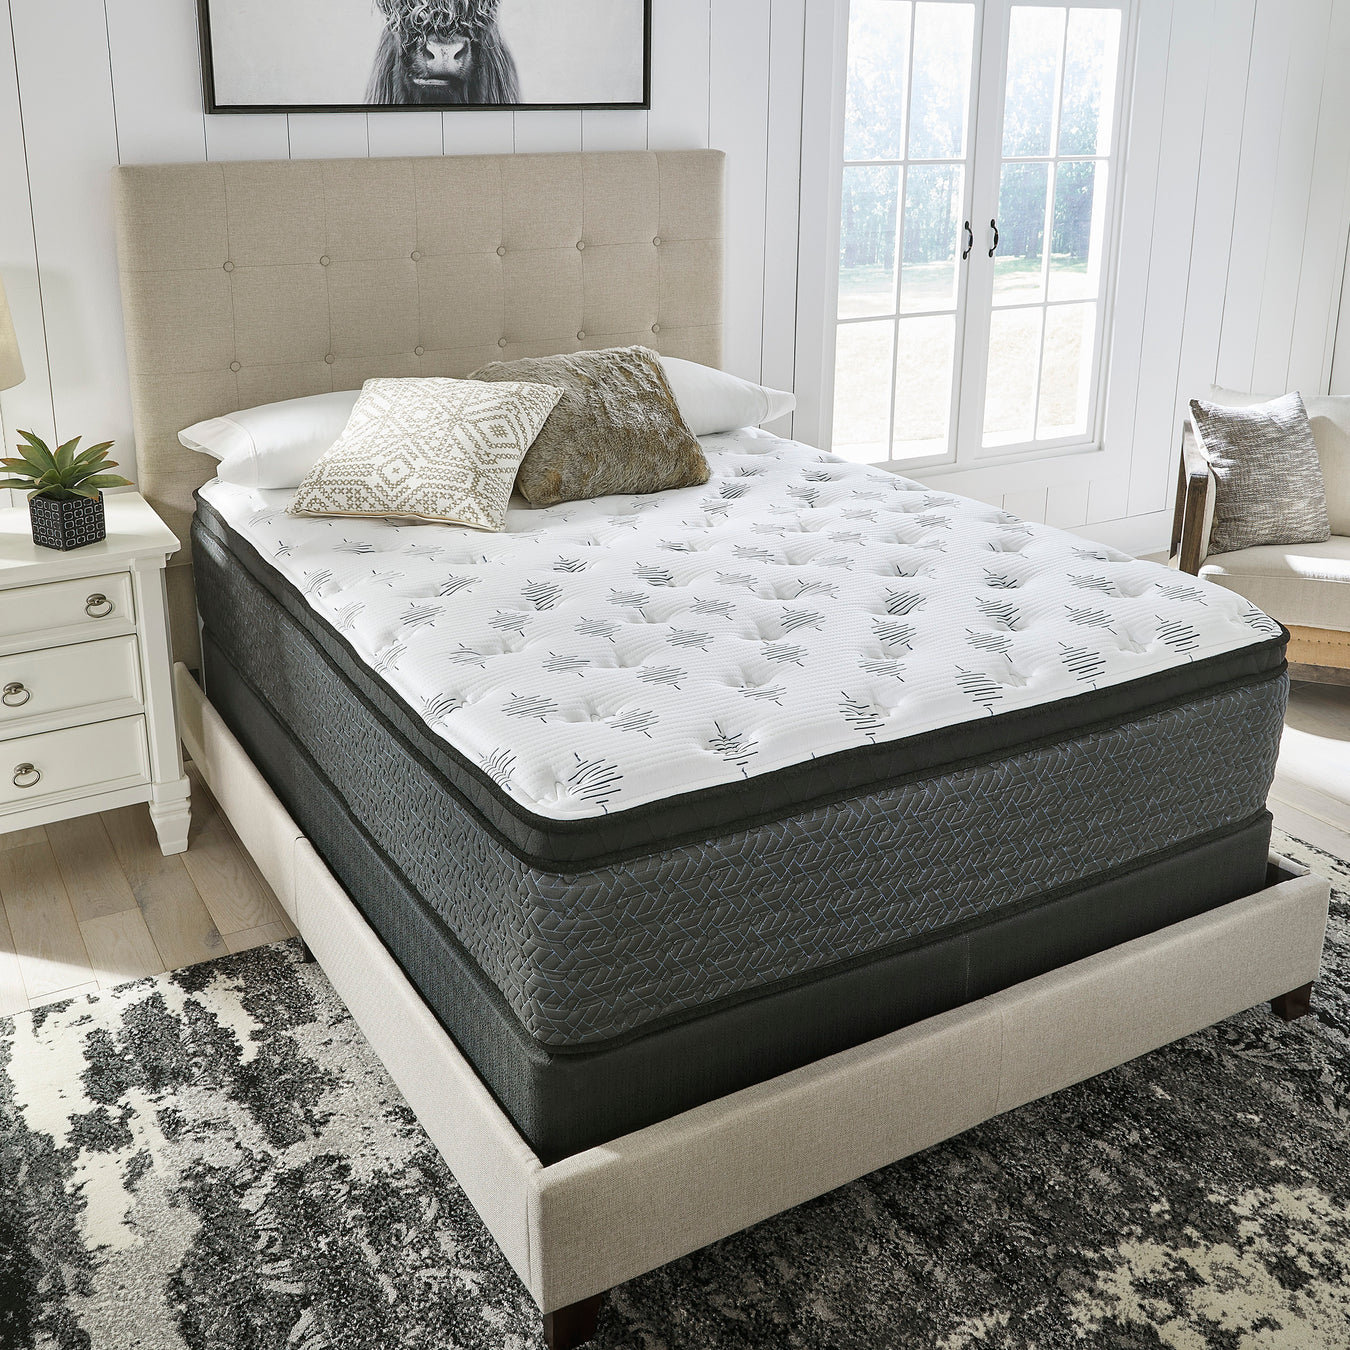 Shop Mattresses at JR Furniture Store in Fayetteville, NC 28311